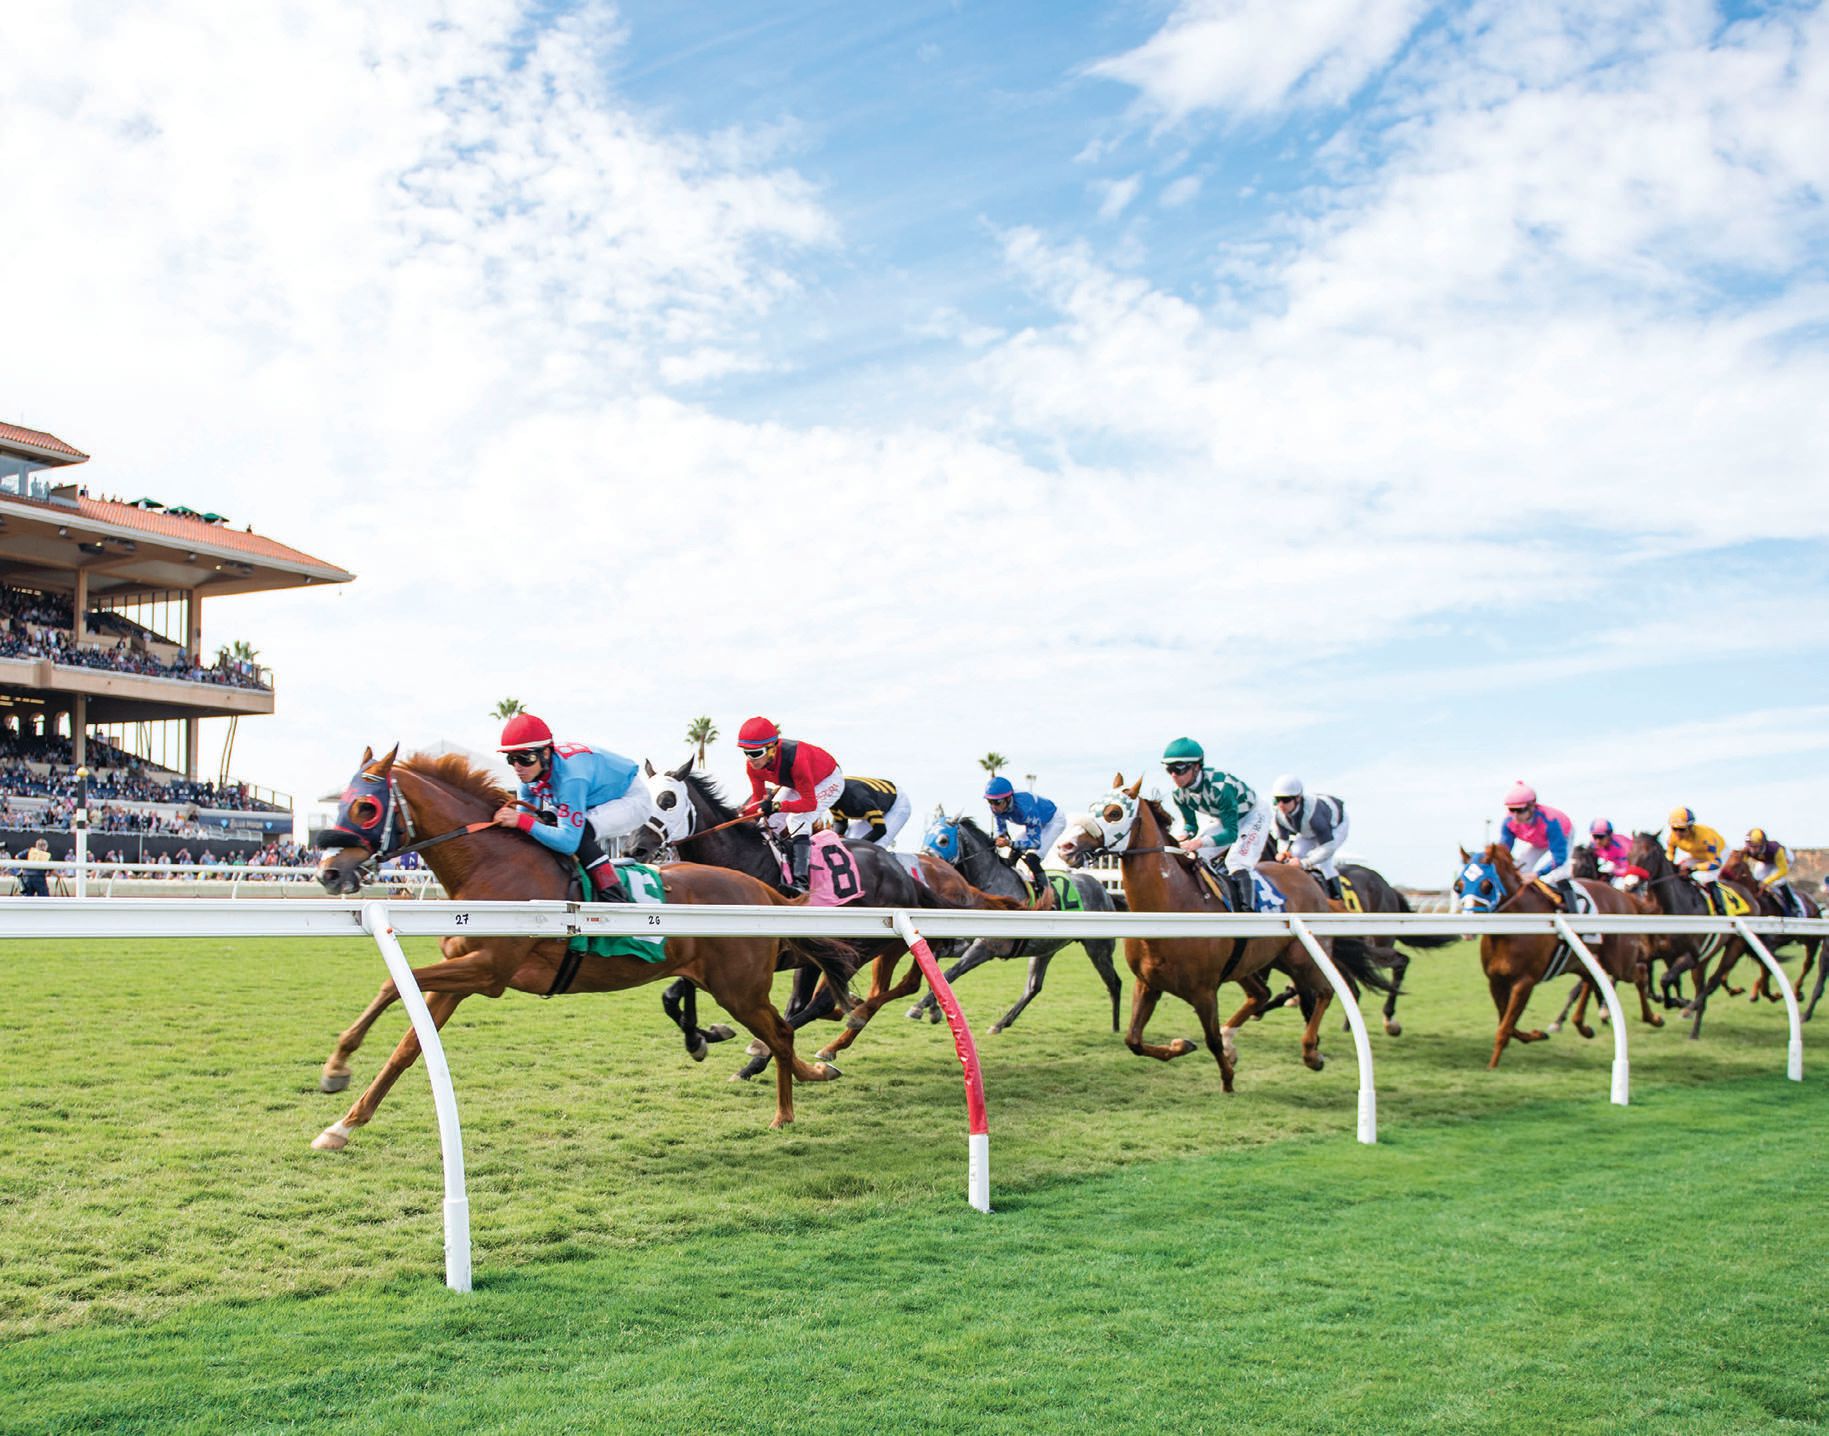 The summer 2022 racing season at the Del Mar Thoroughbred Club begins July 22 PHOTO COURTESY OF DEL MAR THOROUGHBRED CLUB